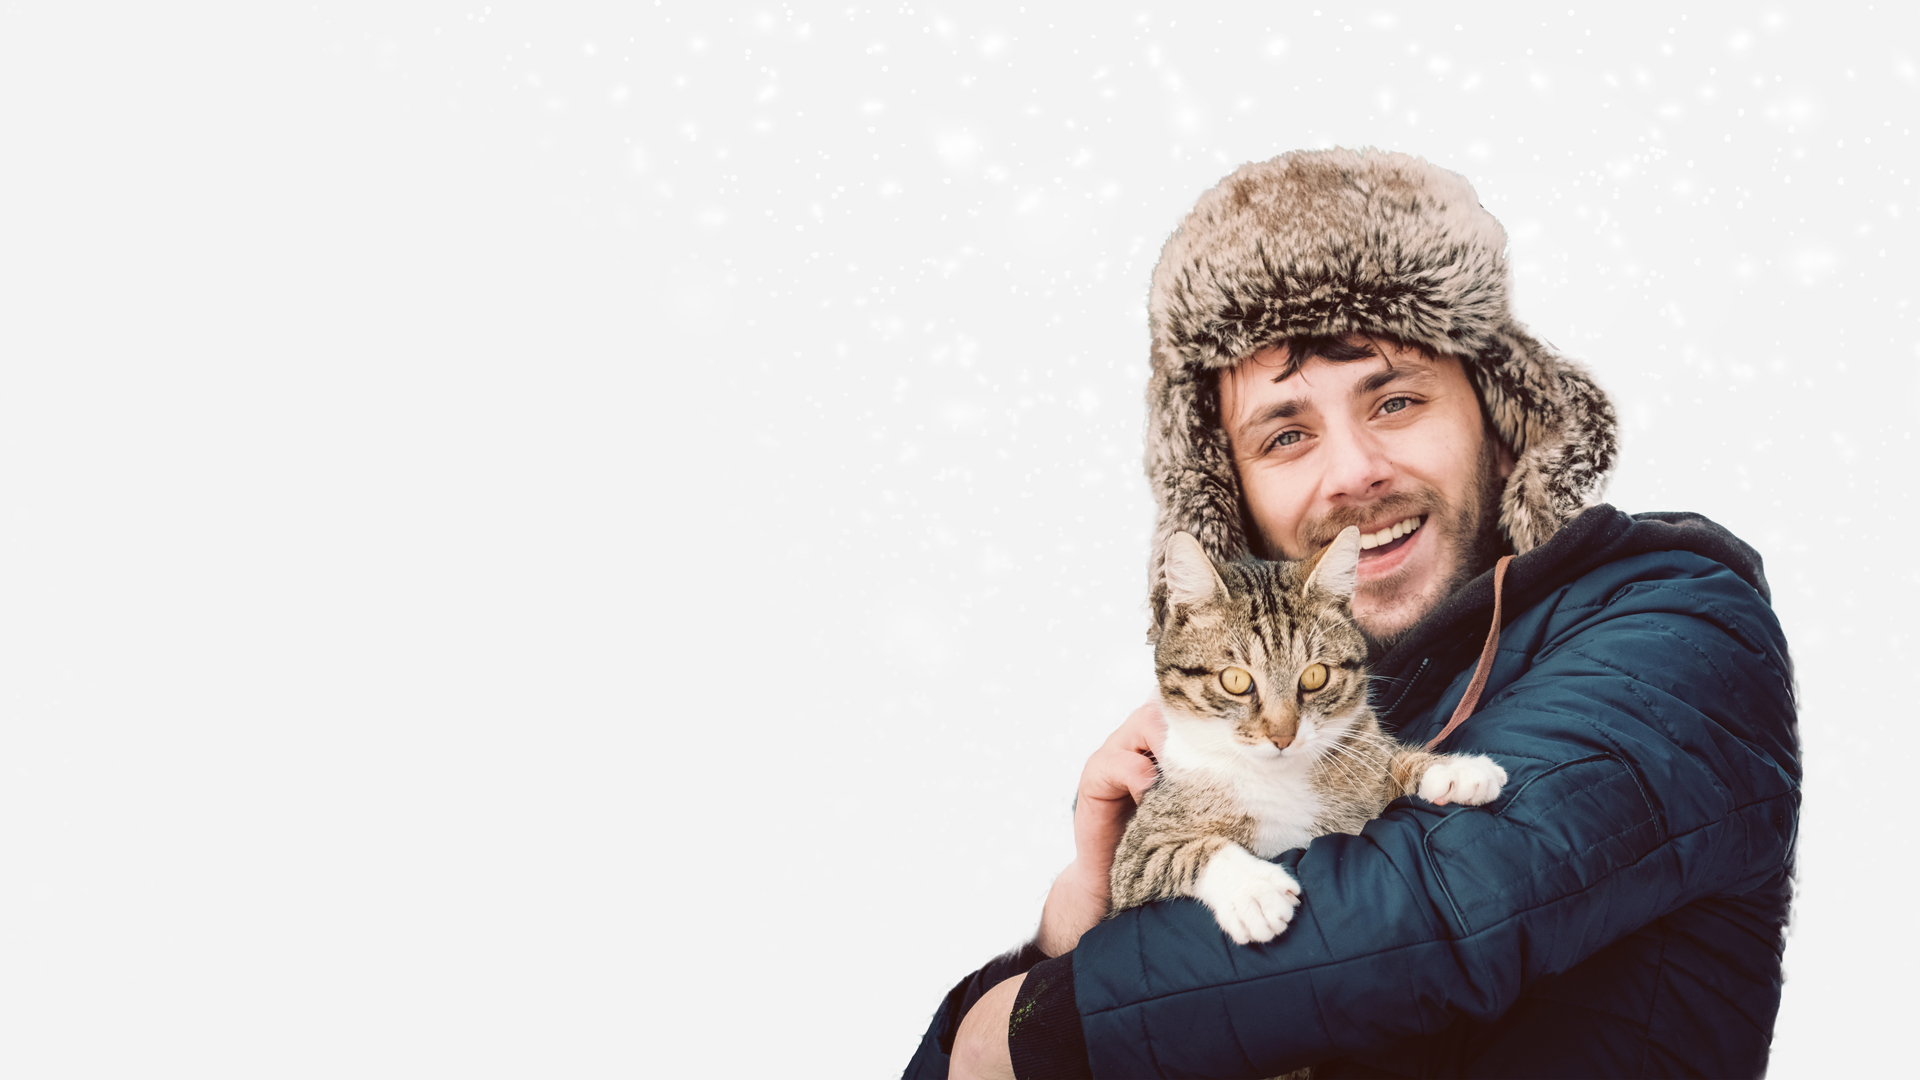 A man in a fuzzy hat holding a tabby cat